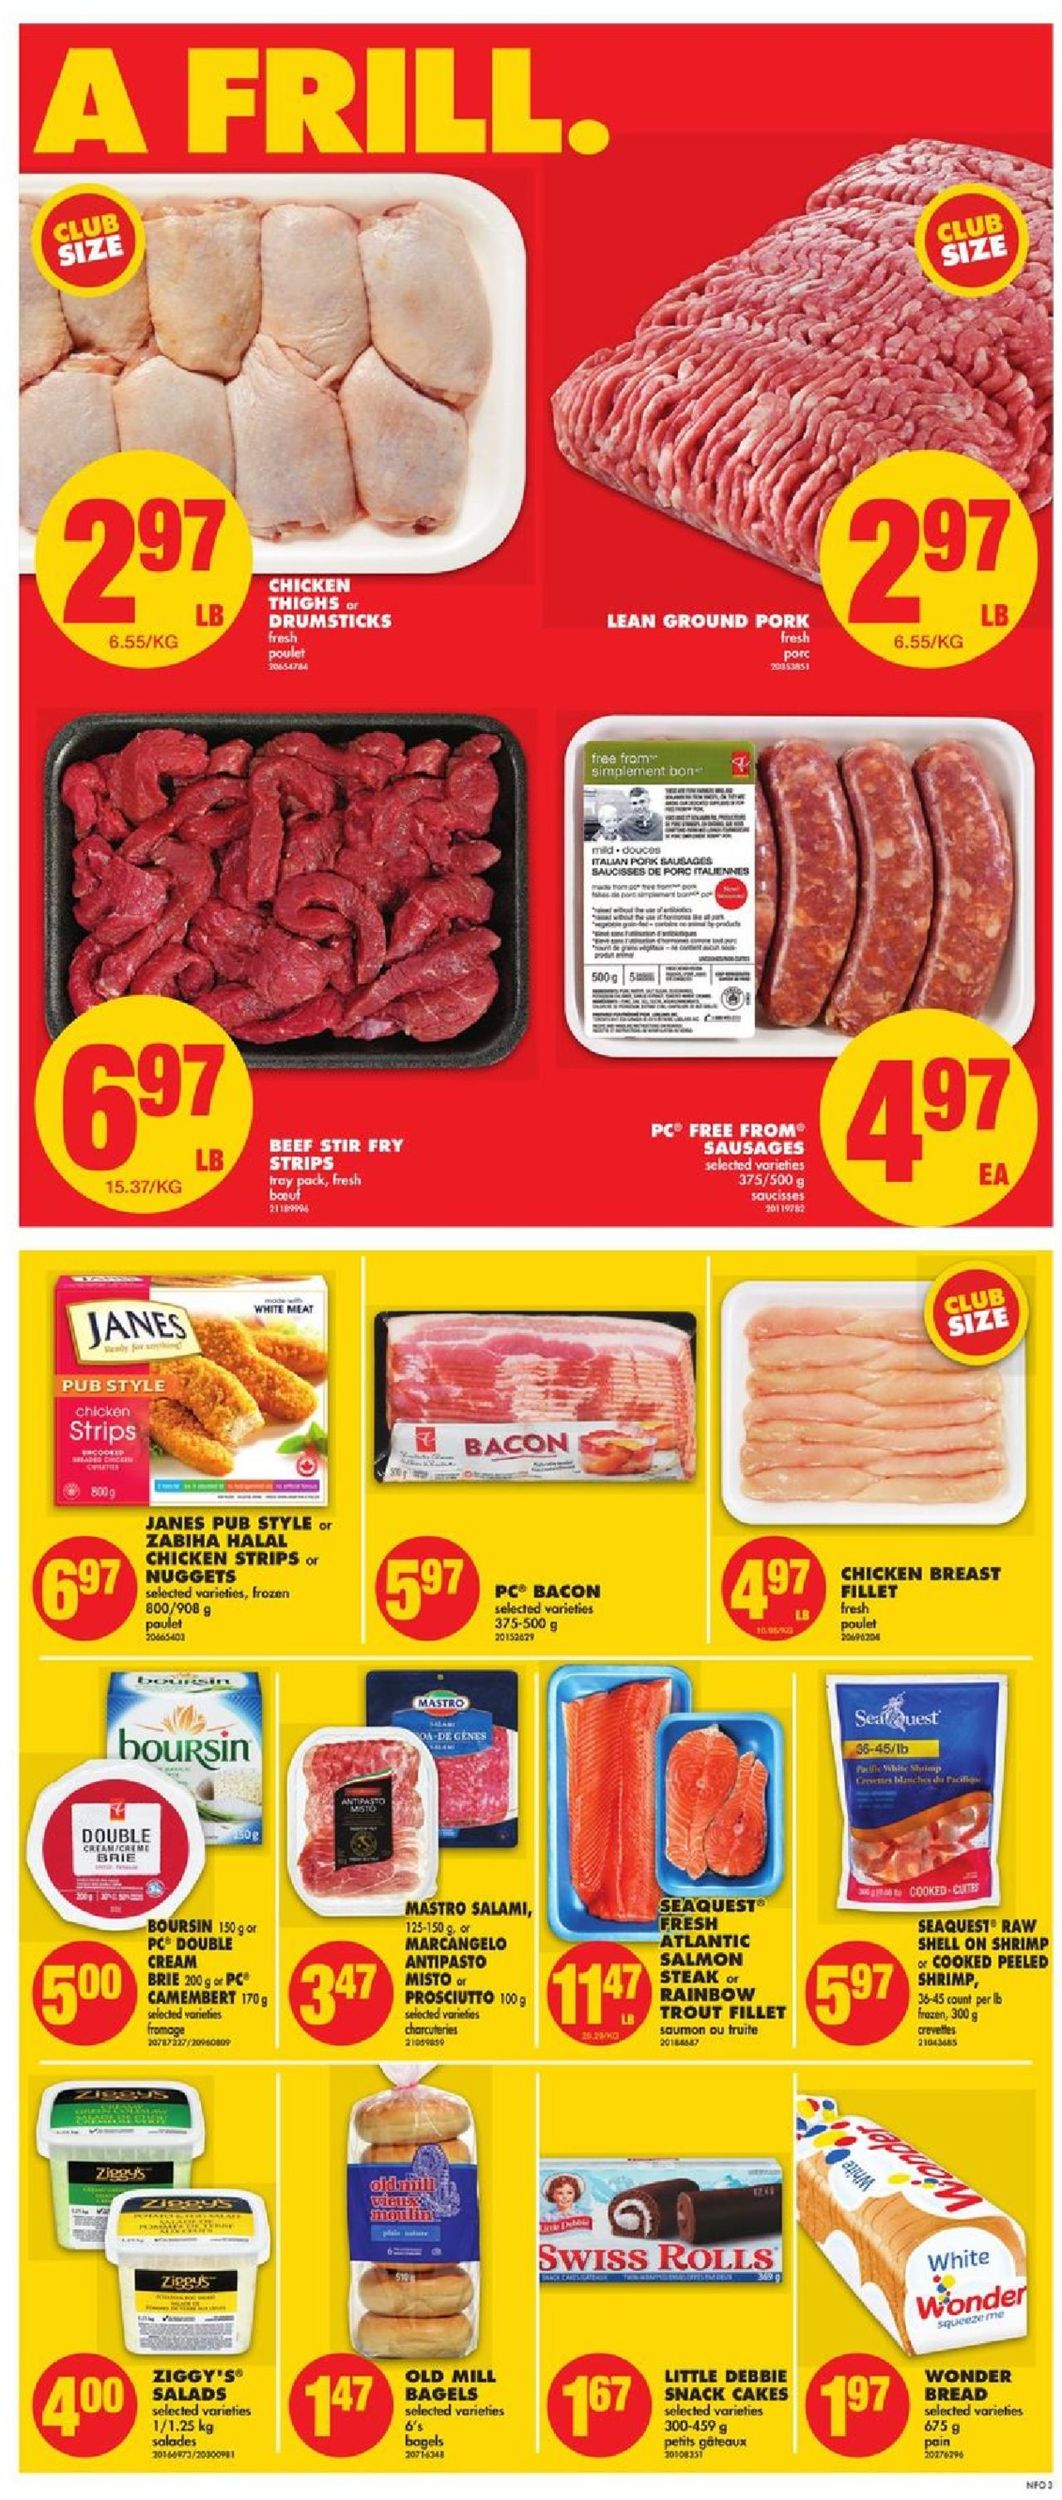 No Frills Flyer - 05/16-05/22/2019 (Page 3)